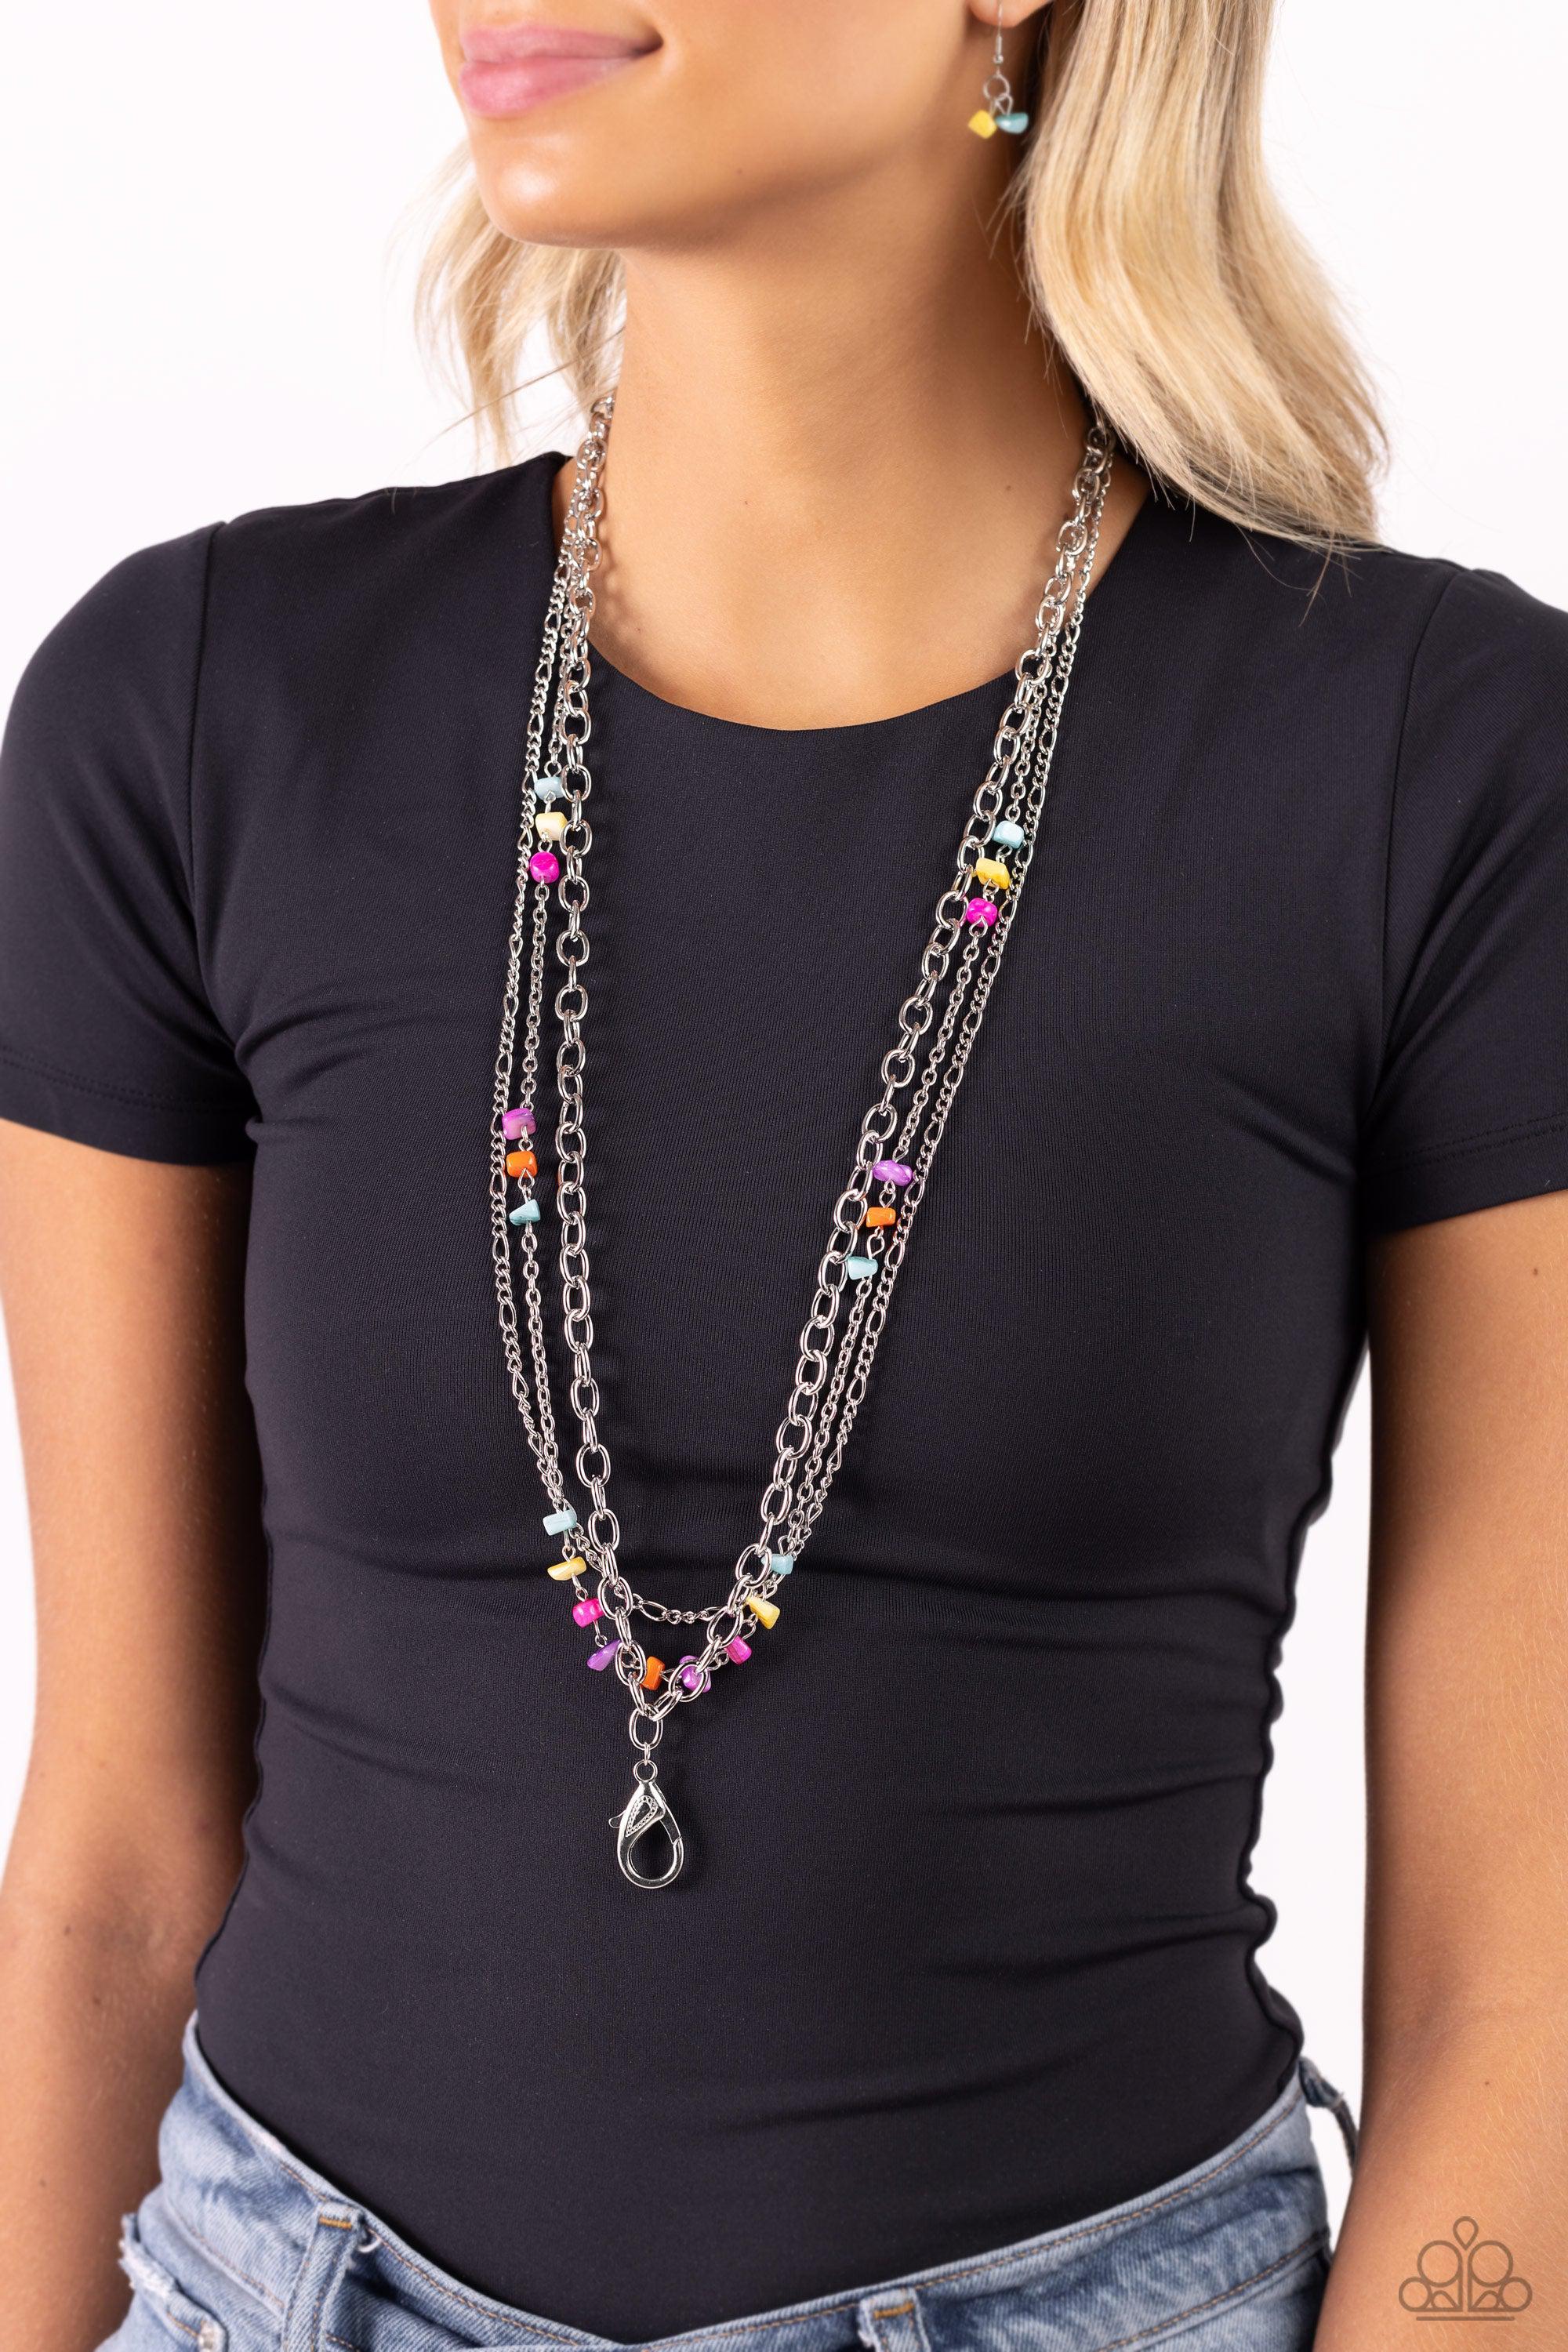 Seize the Stacks Multi Lanyard Necklace - Paparazzi Accessories- lightbox - CarasShop.com - $5 Jewelry by Cara Jewels